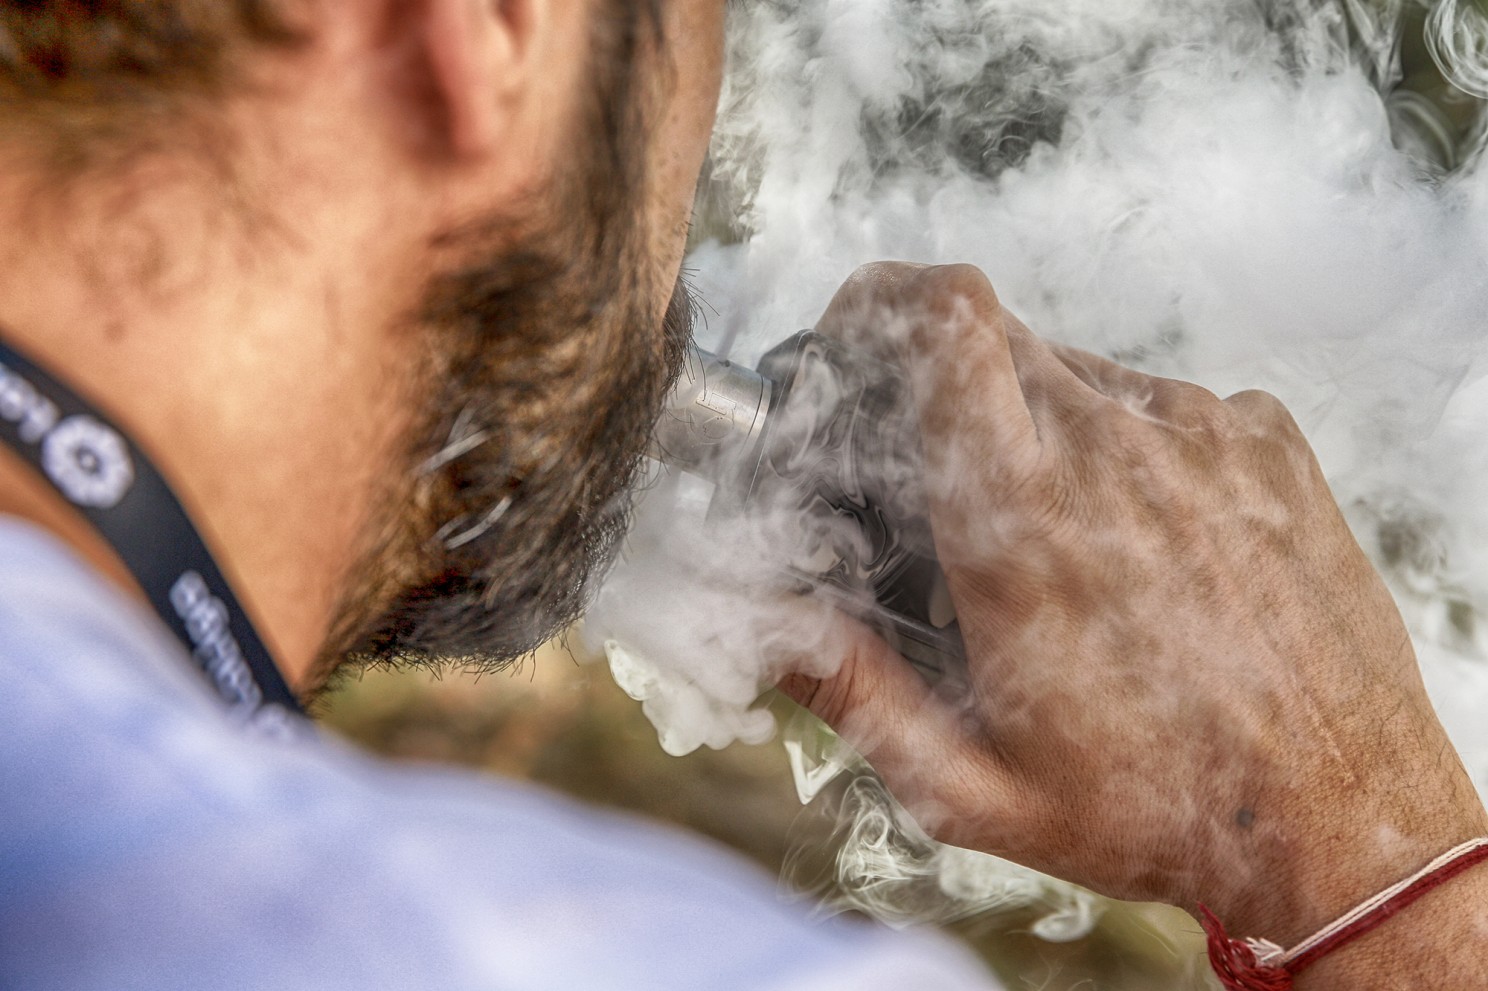 Men who vape are twice as likely to have erectile dysfunction: study